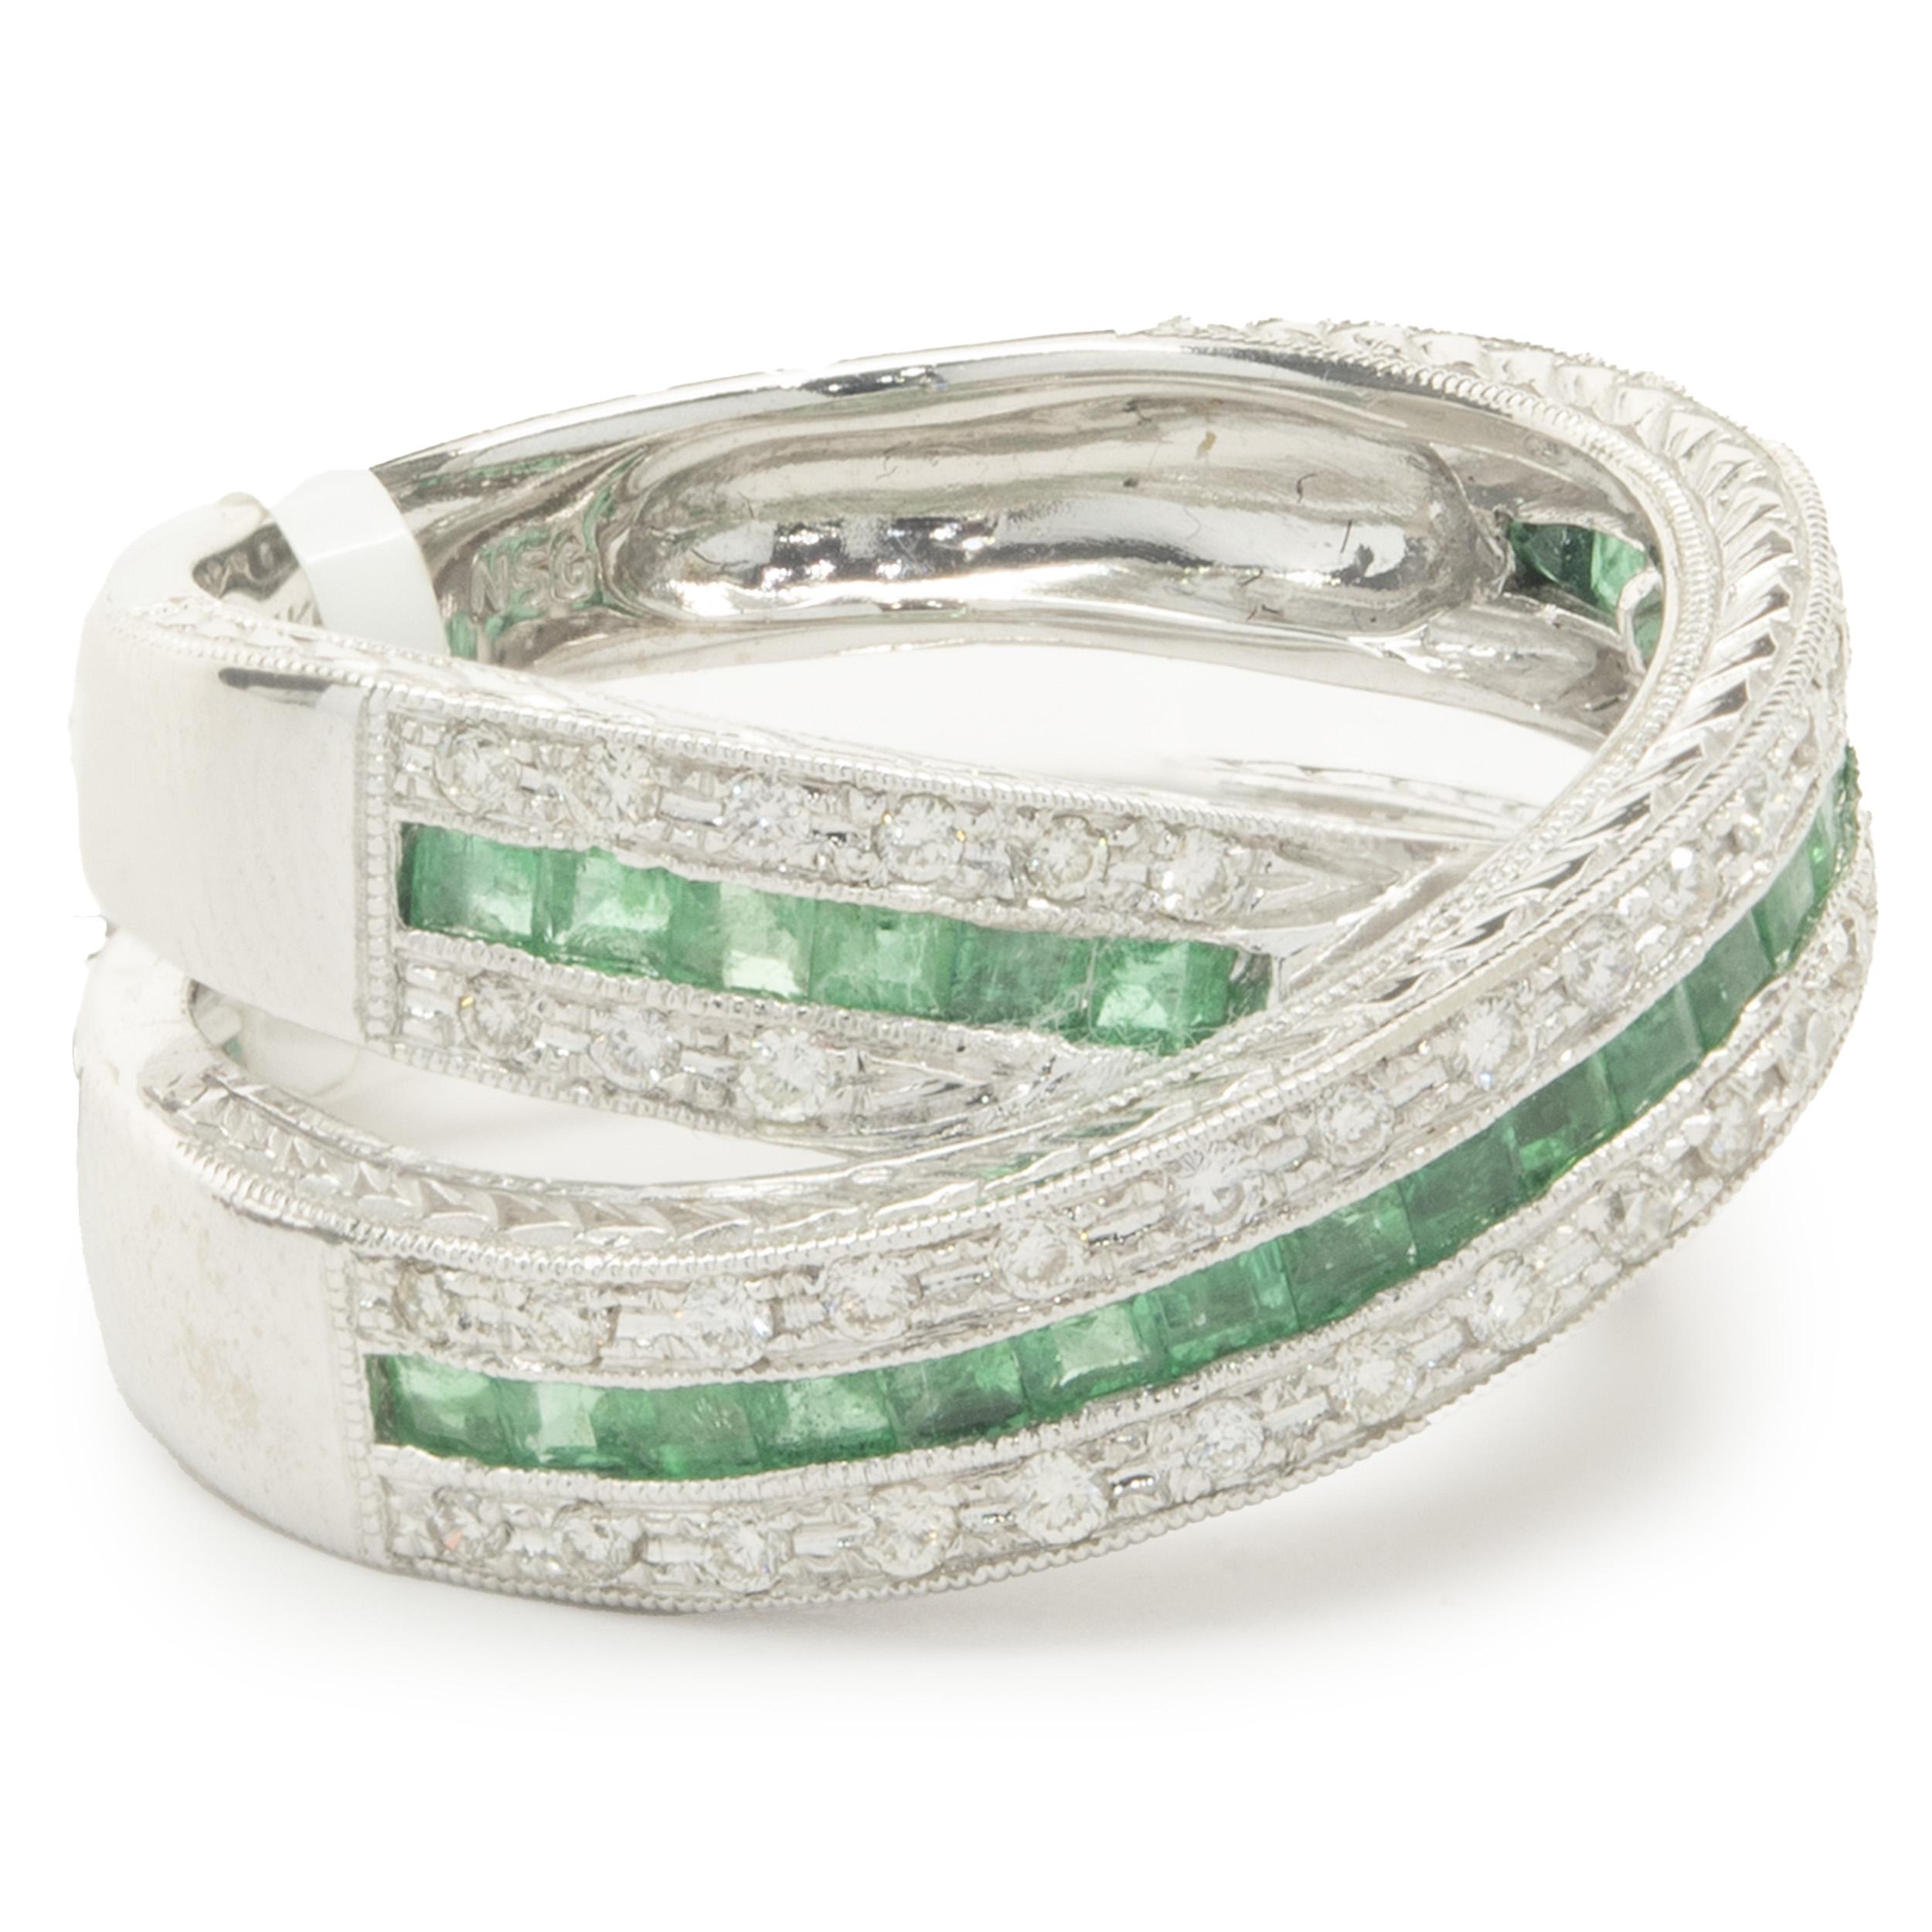 Designer: custom
Material: 14K white gold
Diamond: 51 round brilliant cut = 0.37cttw
Color: G
Clarity: SI1
Emerald: square cut = 1.12cttw
Dimensions: ring top measures 10.4mm wide
Ring Size: 6.5 (complimentary sizing available)
Weight: 8.42 grams

